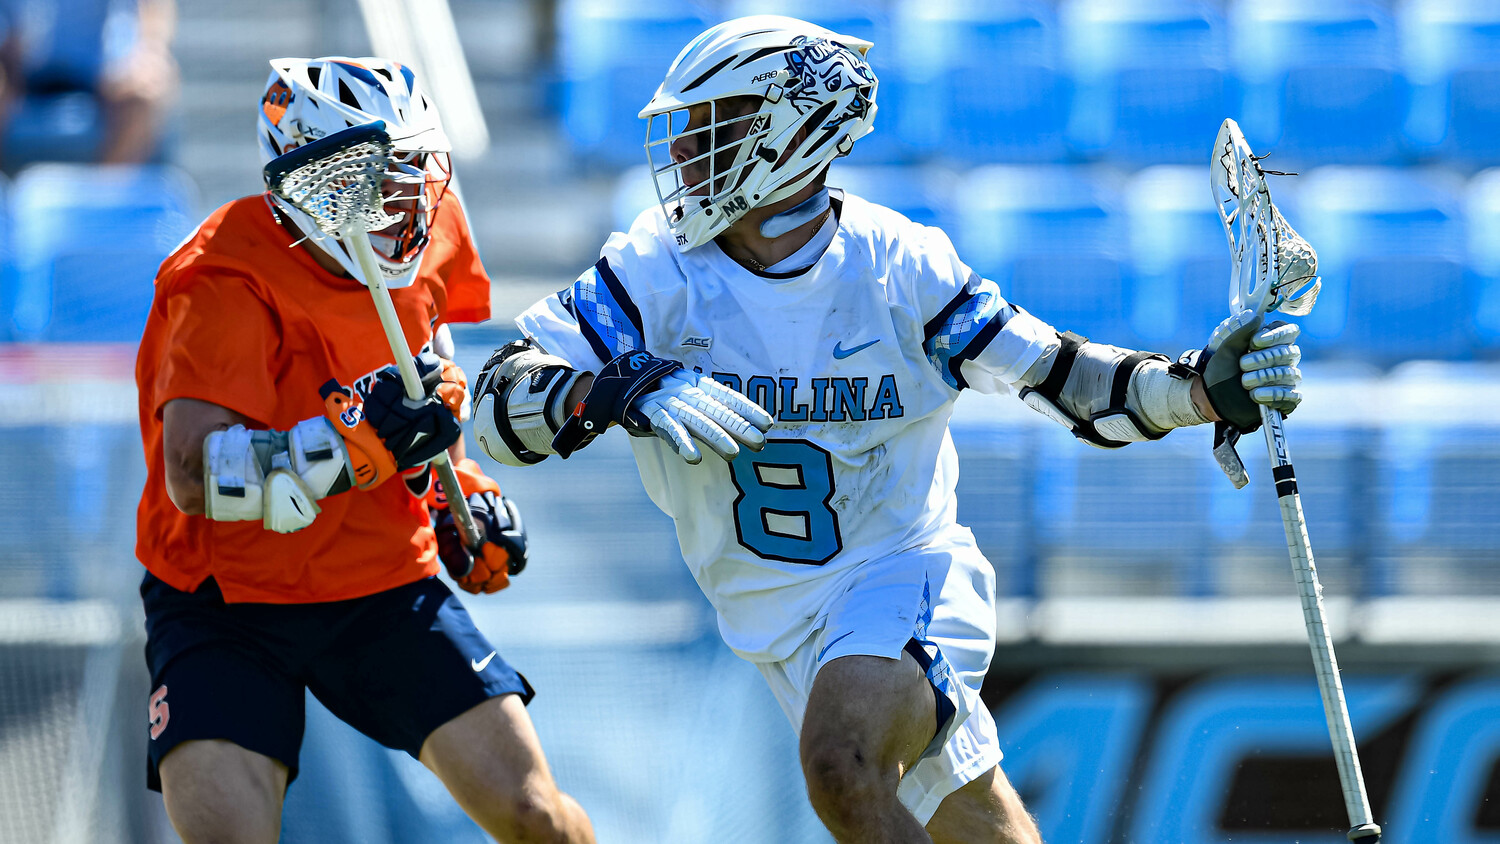 Owen Duffy, a St. Anthony's graduate, was the No. 1 boys lacrosse recruit in his class. UNC Athletics